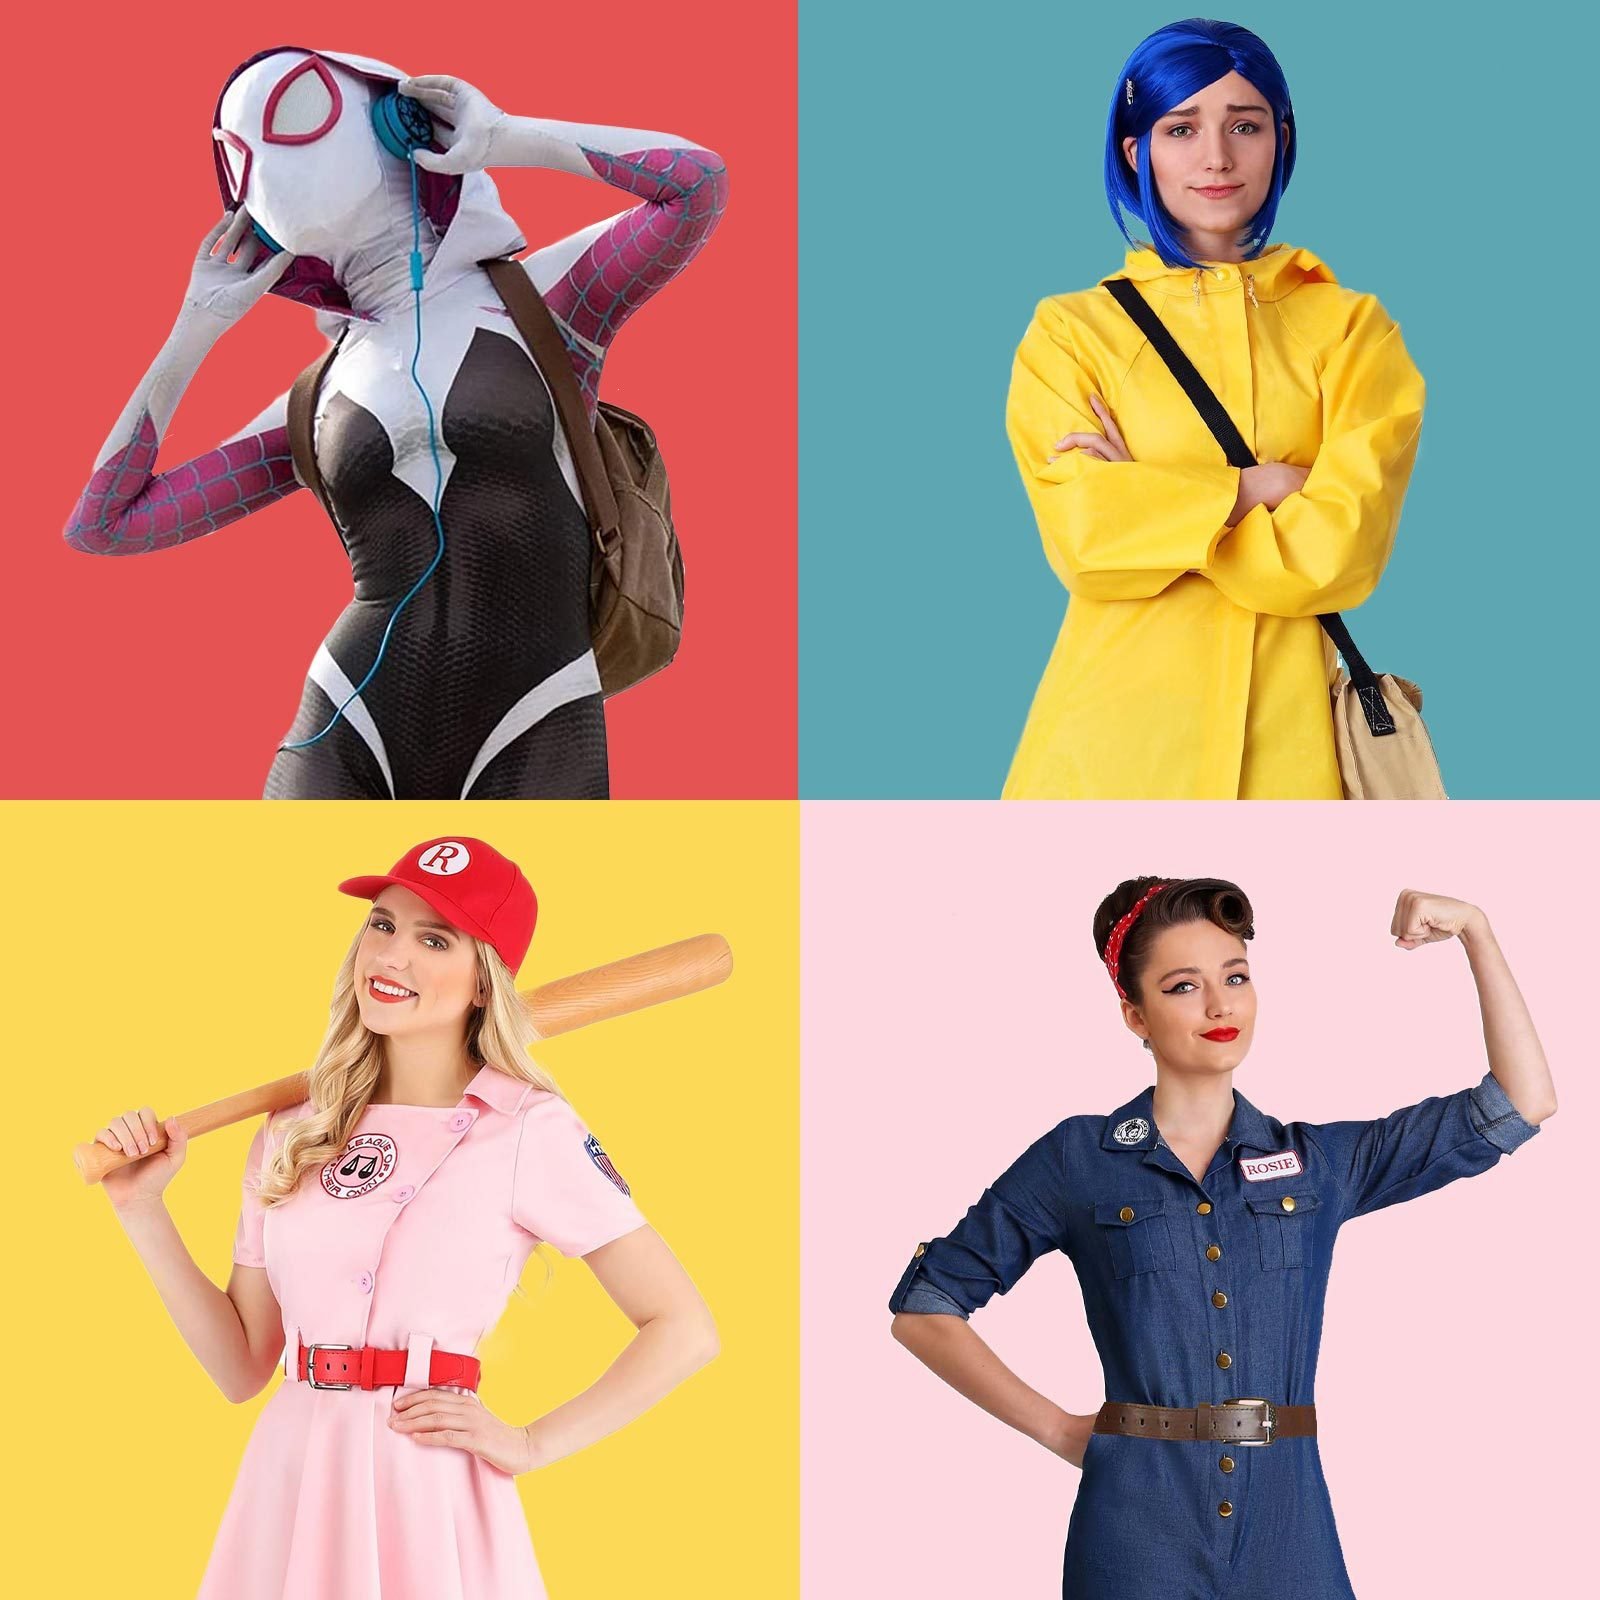 60 Halloween Costume Ideas for Women That Are Scary Good